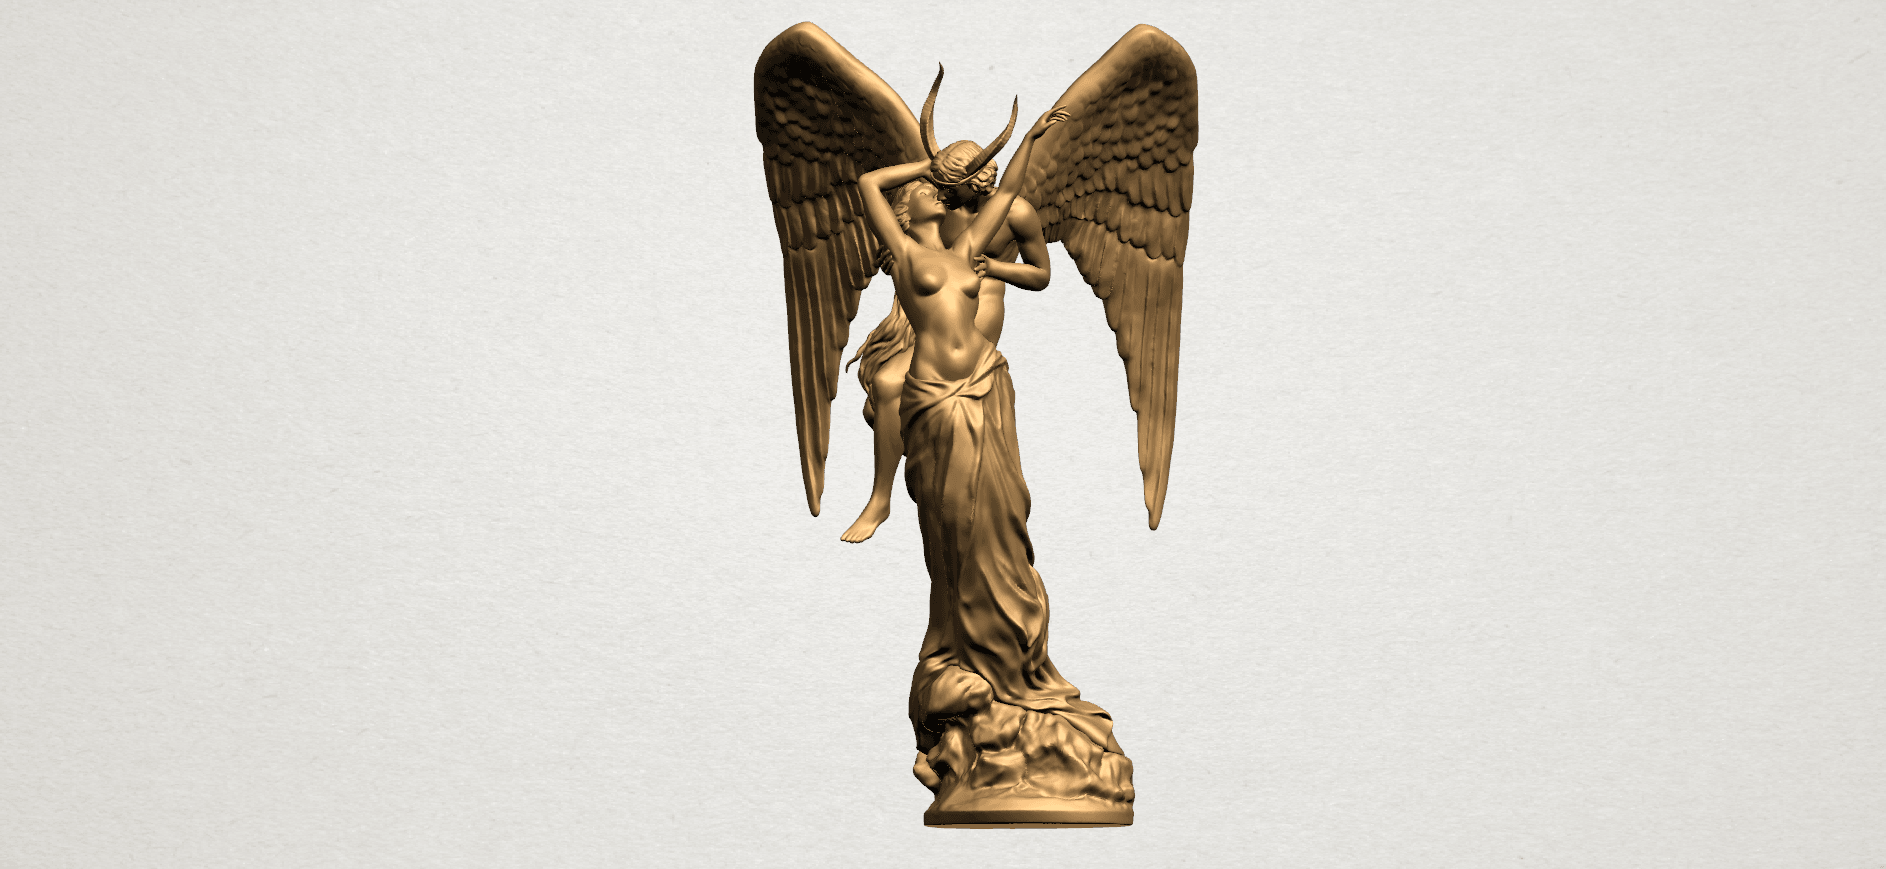 Angel and devil - B02.png Download free STL file Angel and devil • 3D printable object, GeorgesNikkei